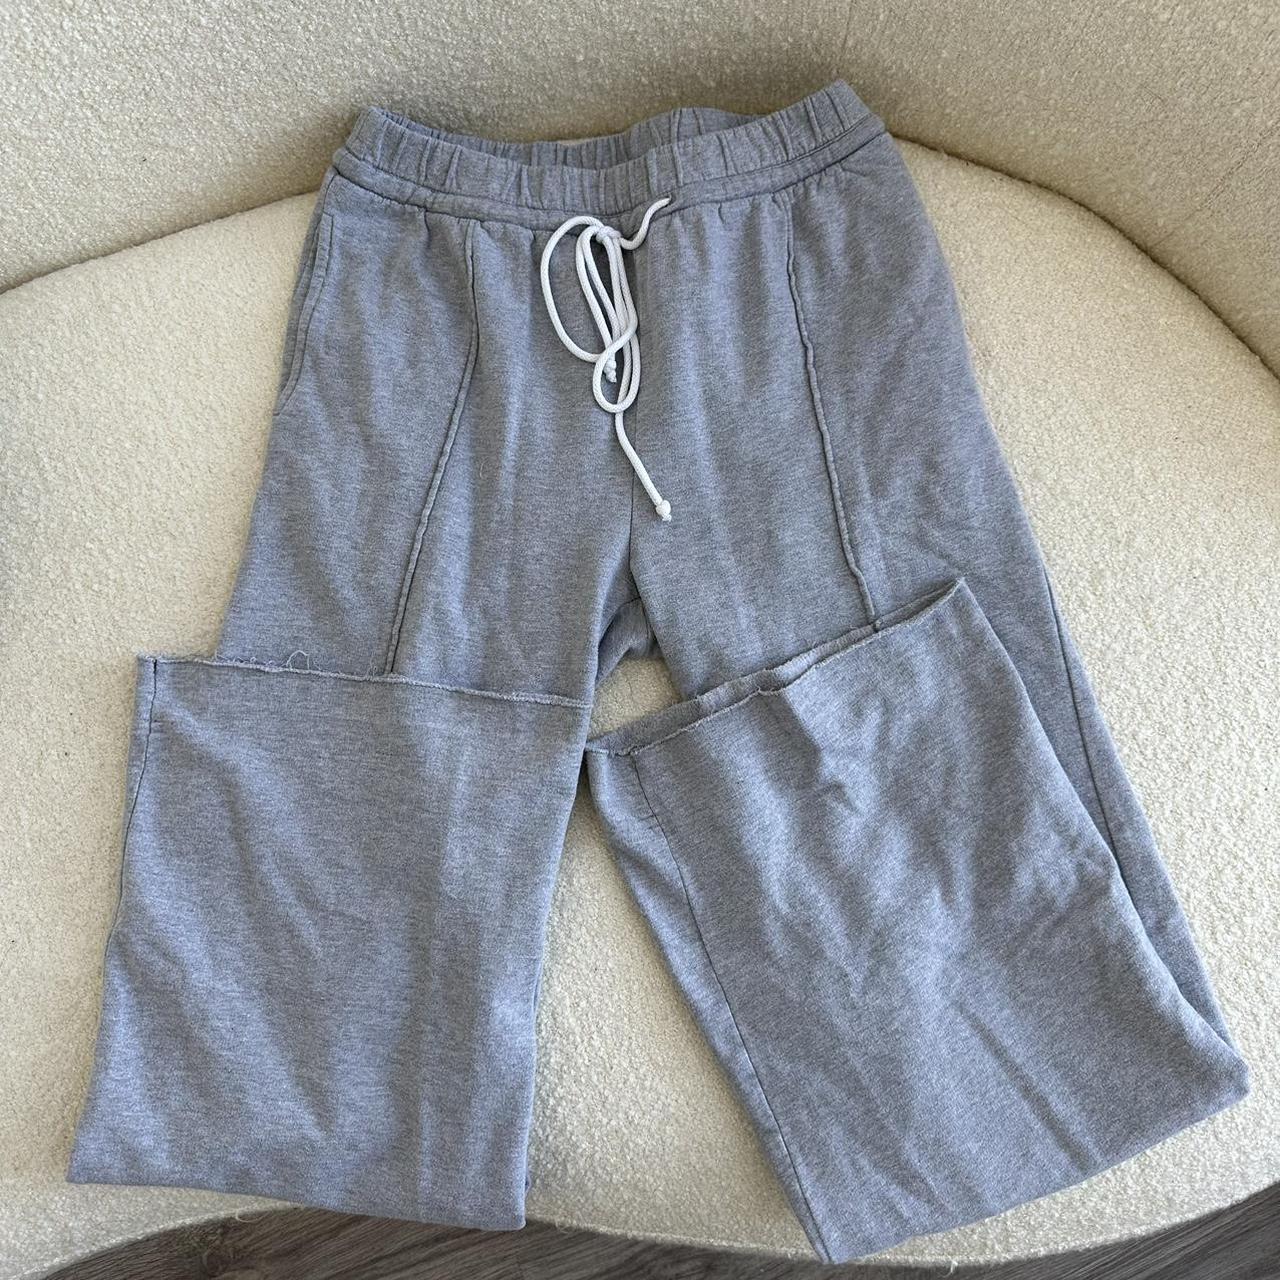 Urban Outfitters Sweatpants Condition: Used, but no... - Depop